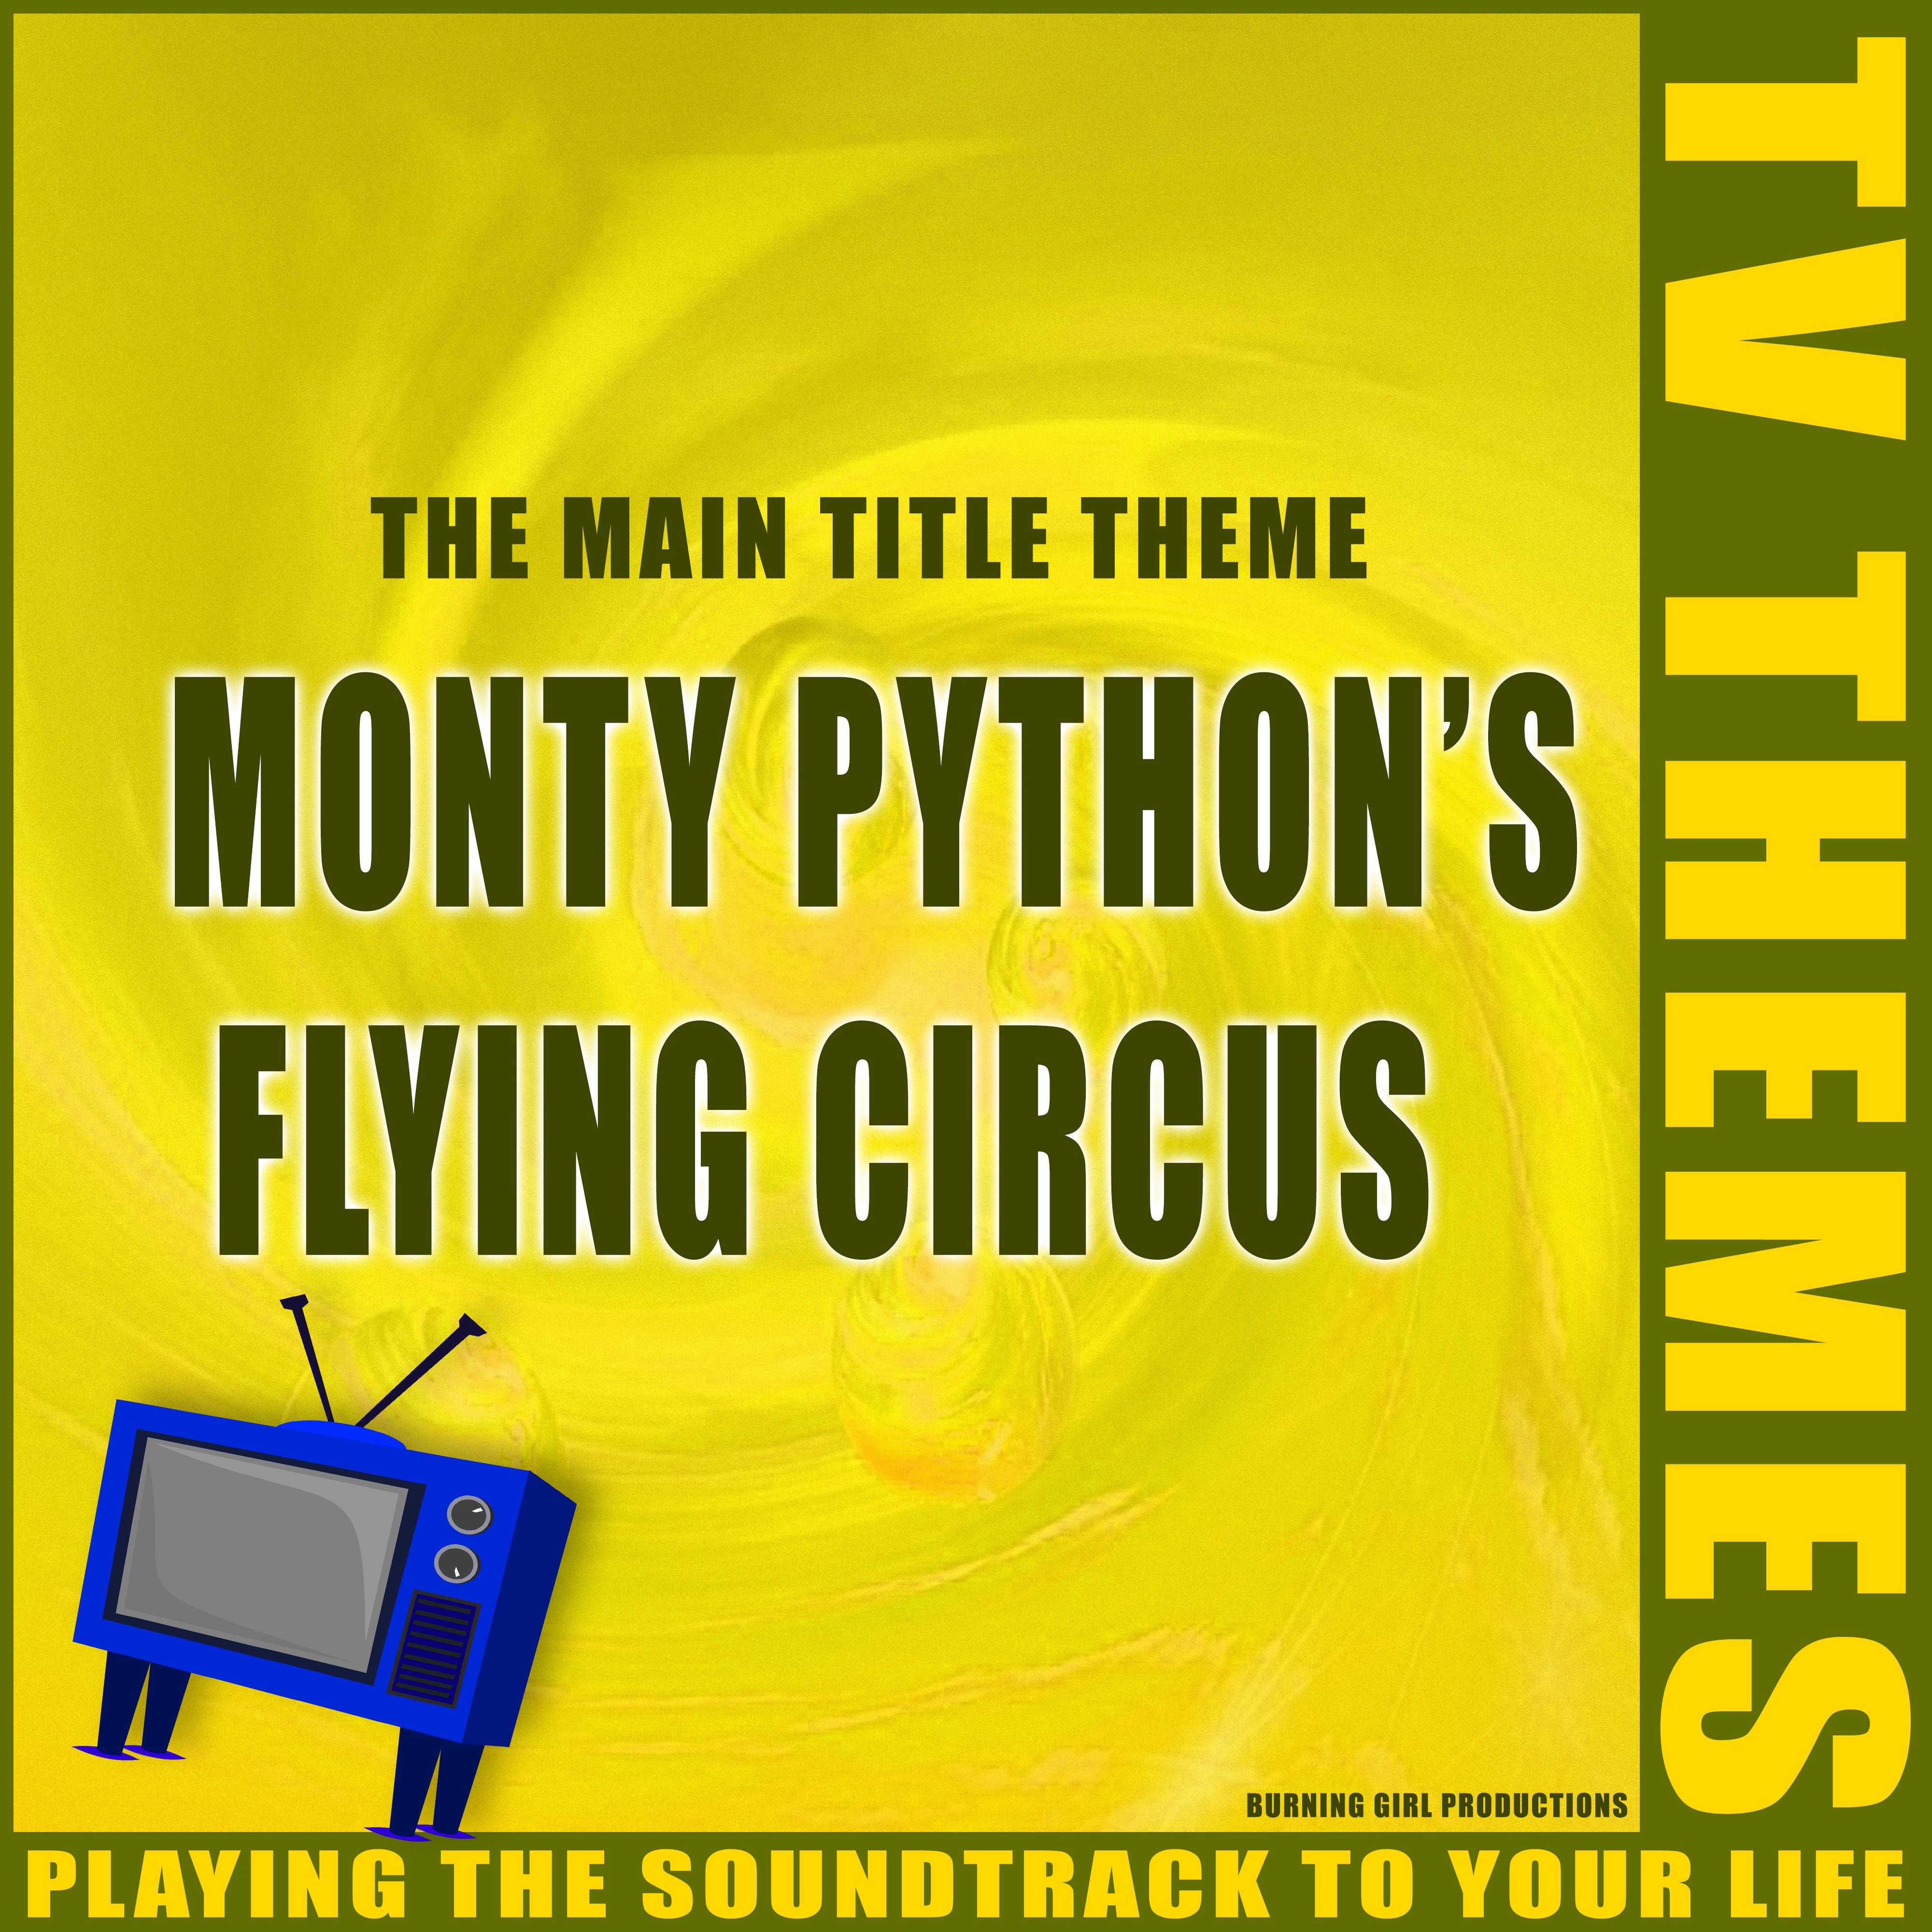 Monty Python's Flying Circus - The Main Title Theme